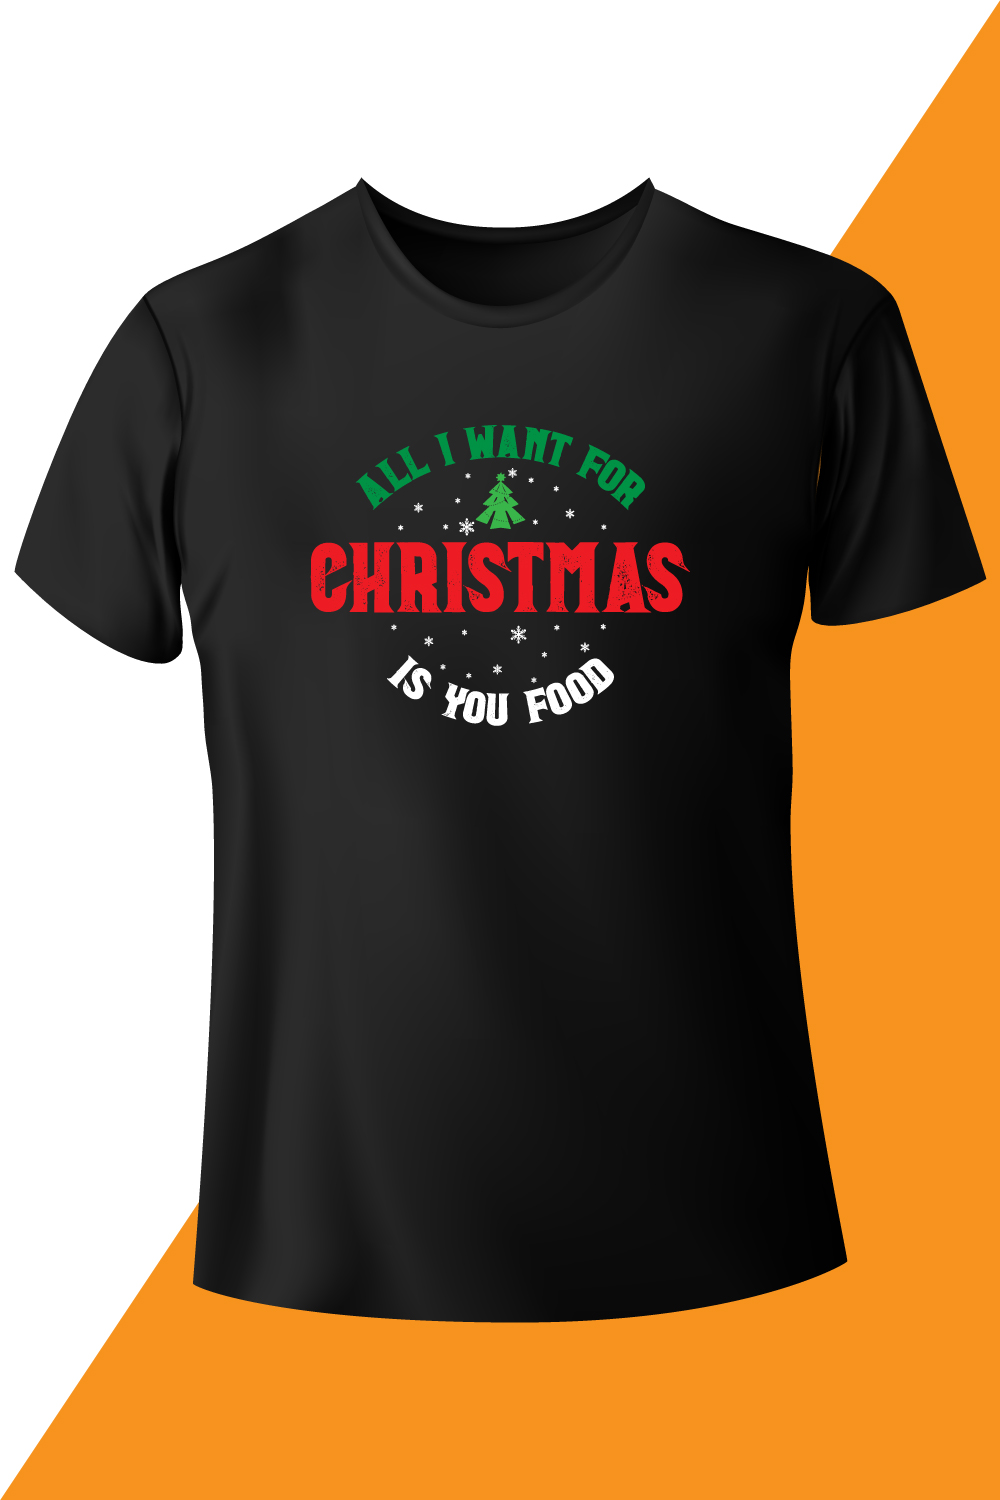 Image of a black t-shirt with a charming inscription on the theme of Christmas.